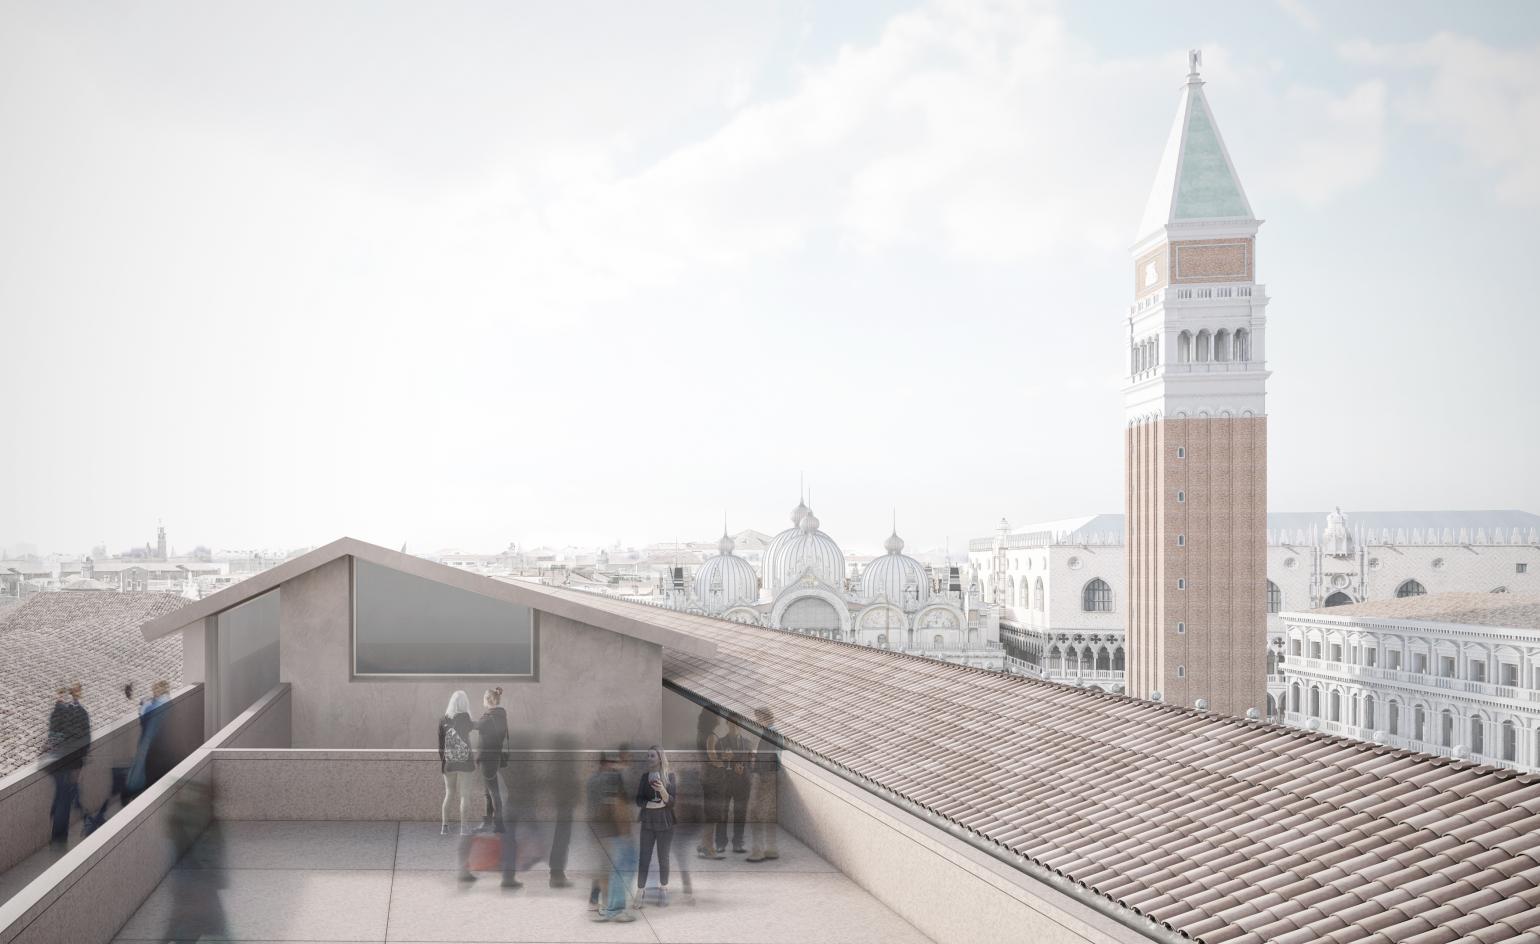 Upcoming projects from David Chipperfield Architects | Wallpaper